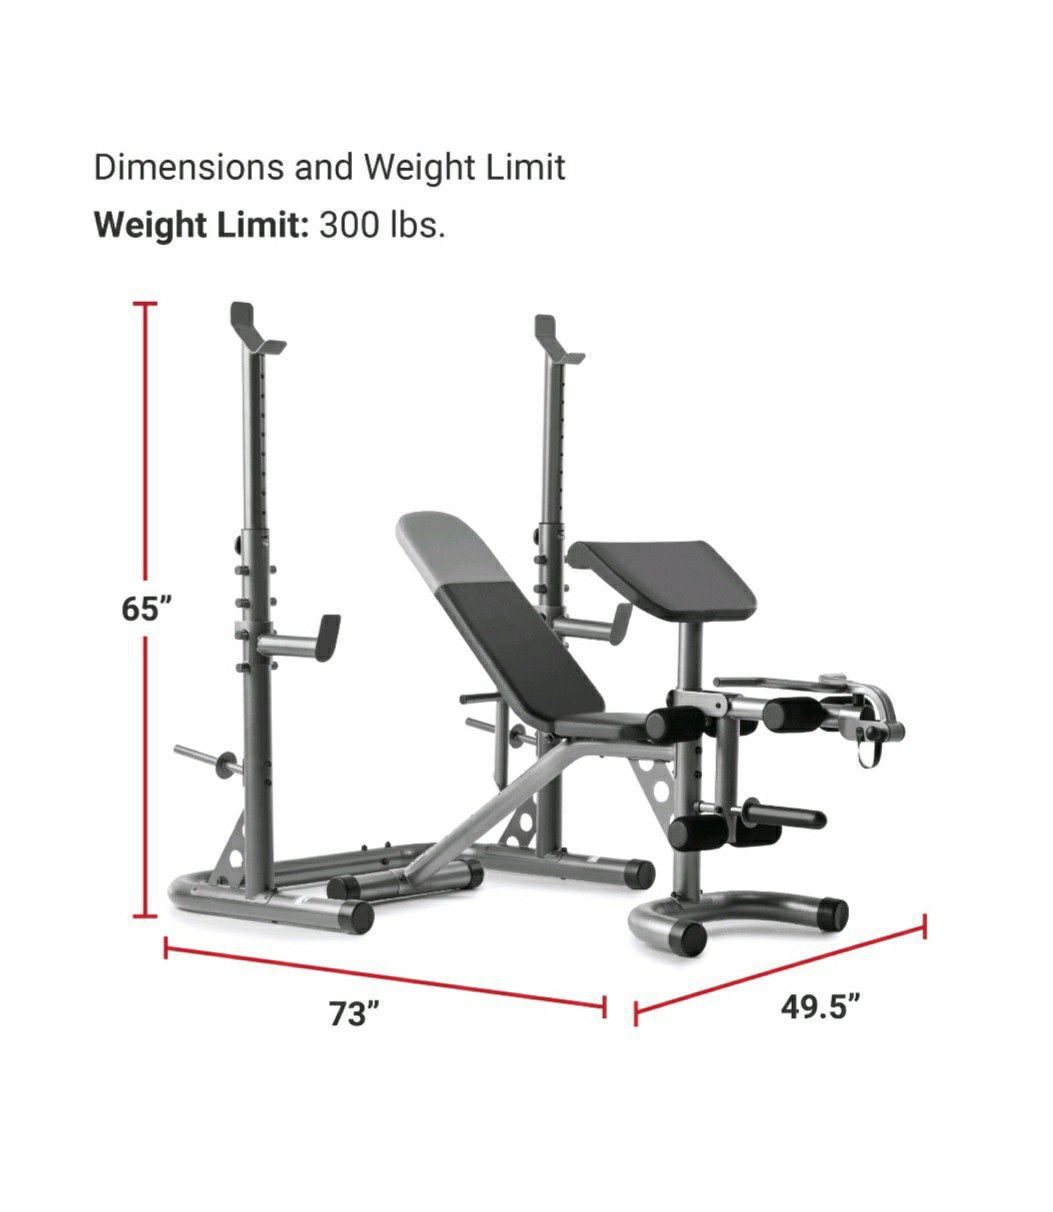 BRAND NEW *Weider XRS 20 Adjustable Olympic Workout Bench * SQUAT RACK